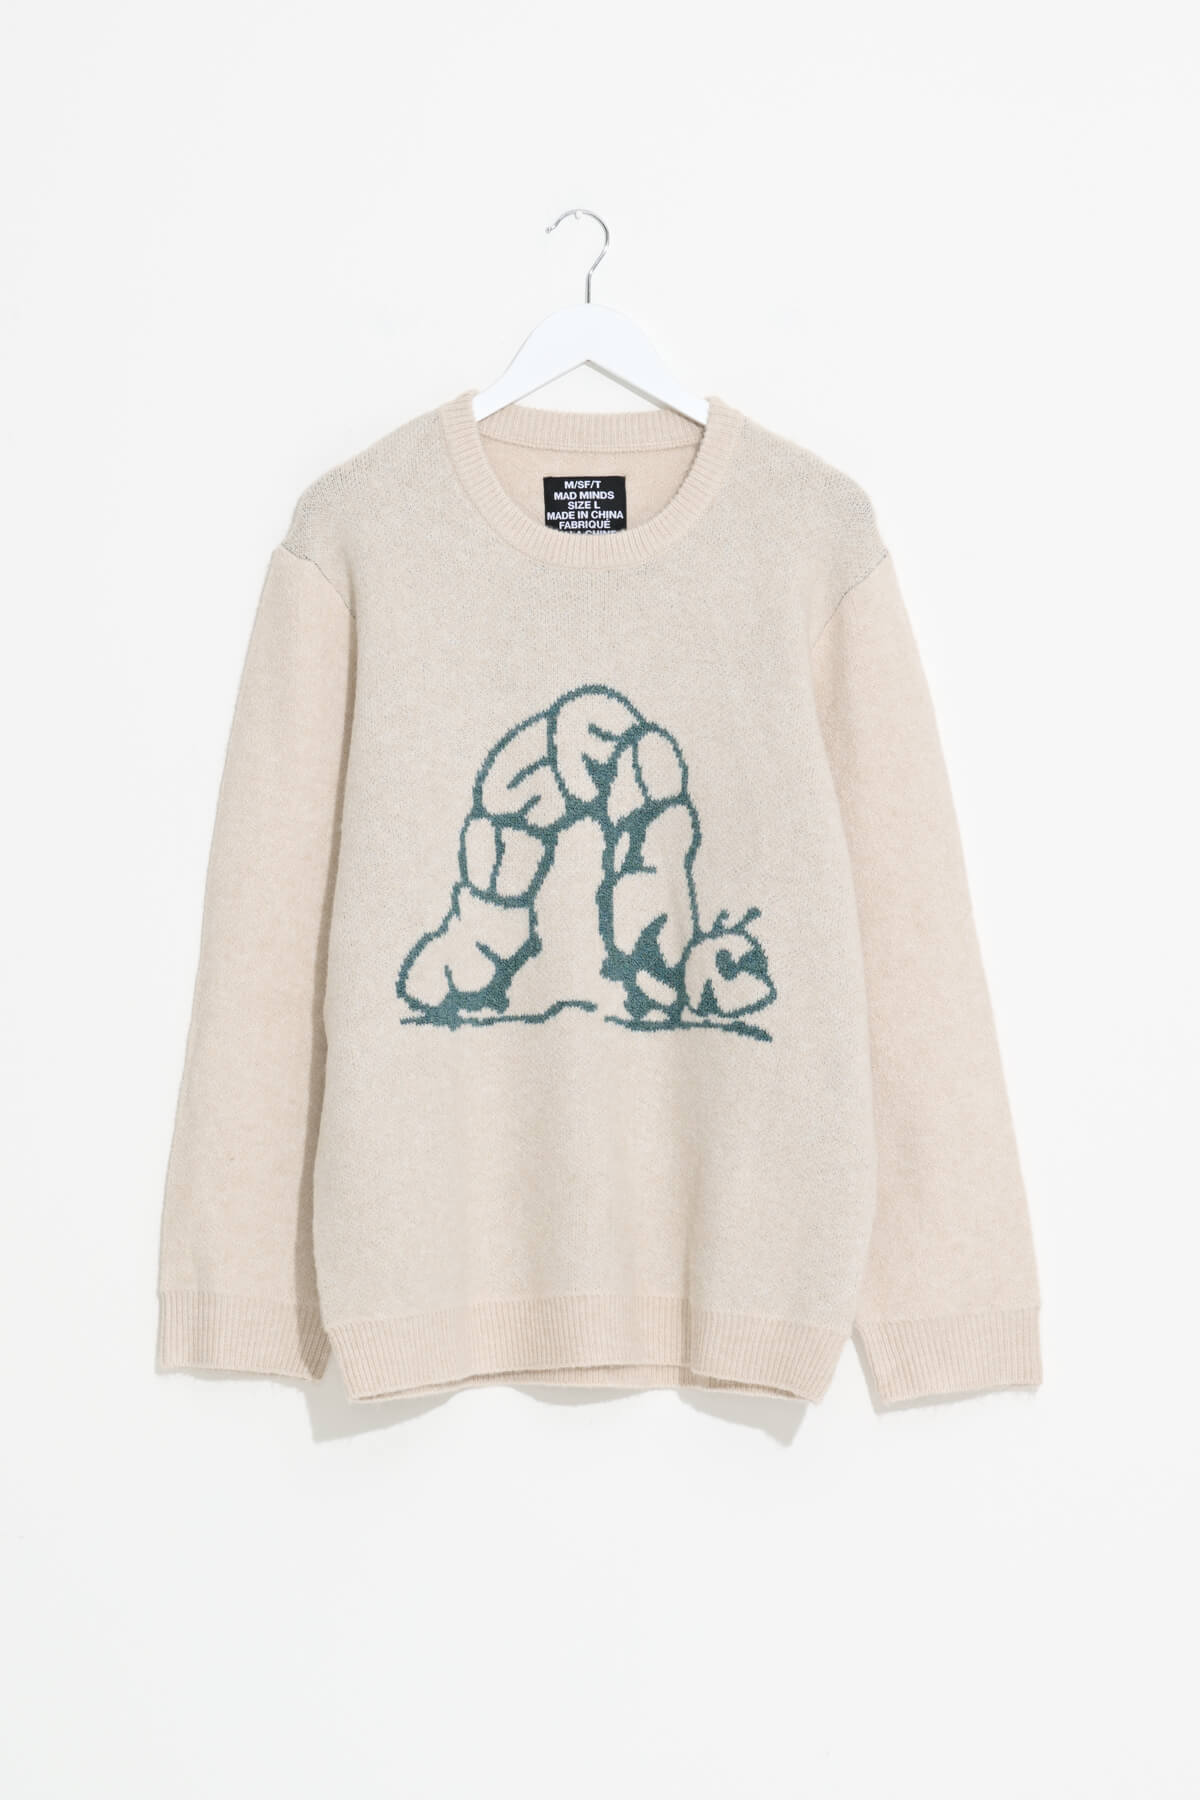 Misfit Shapes - Third Cycle Knit Crew - Thrift White